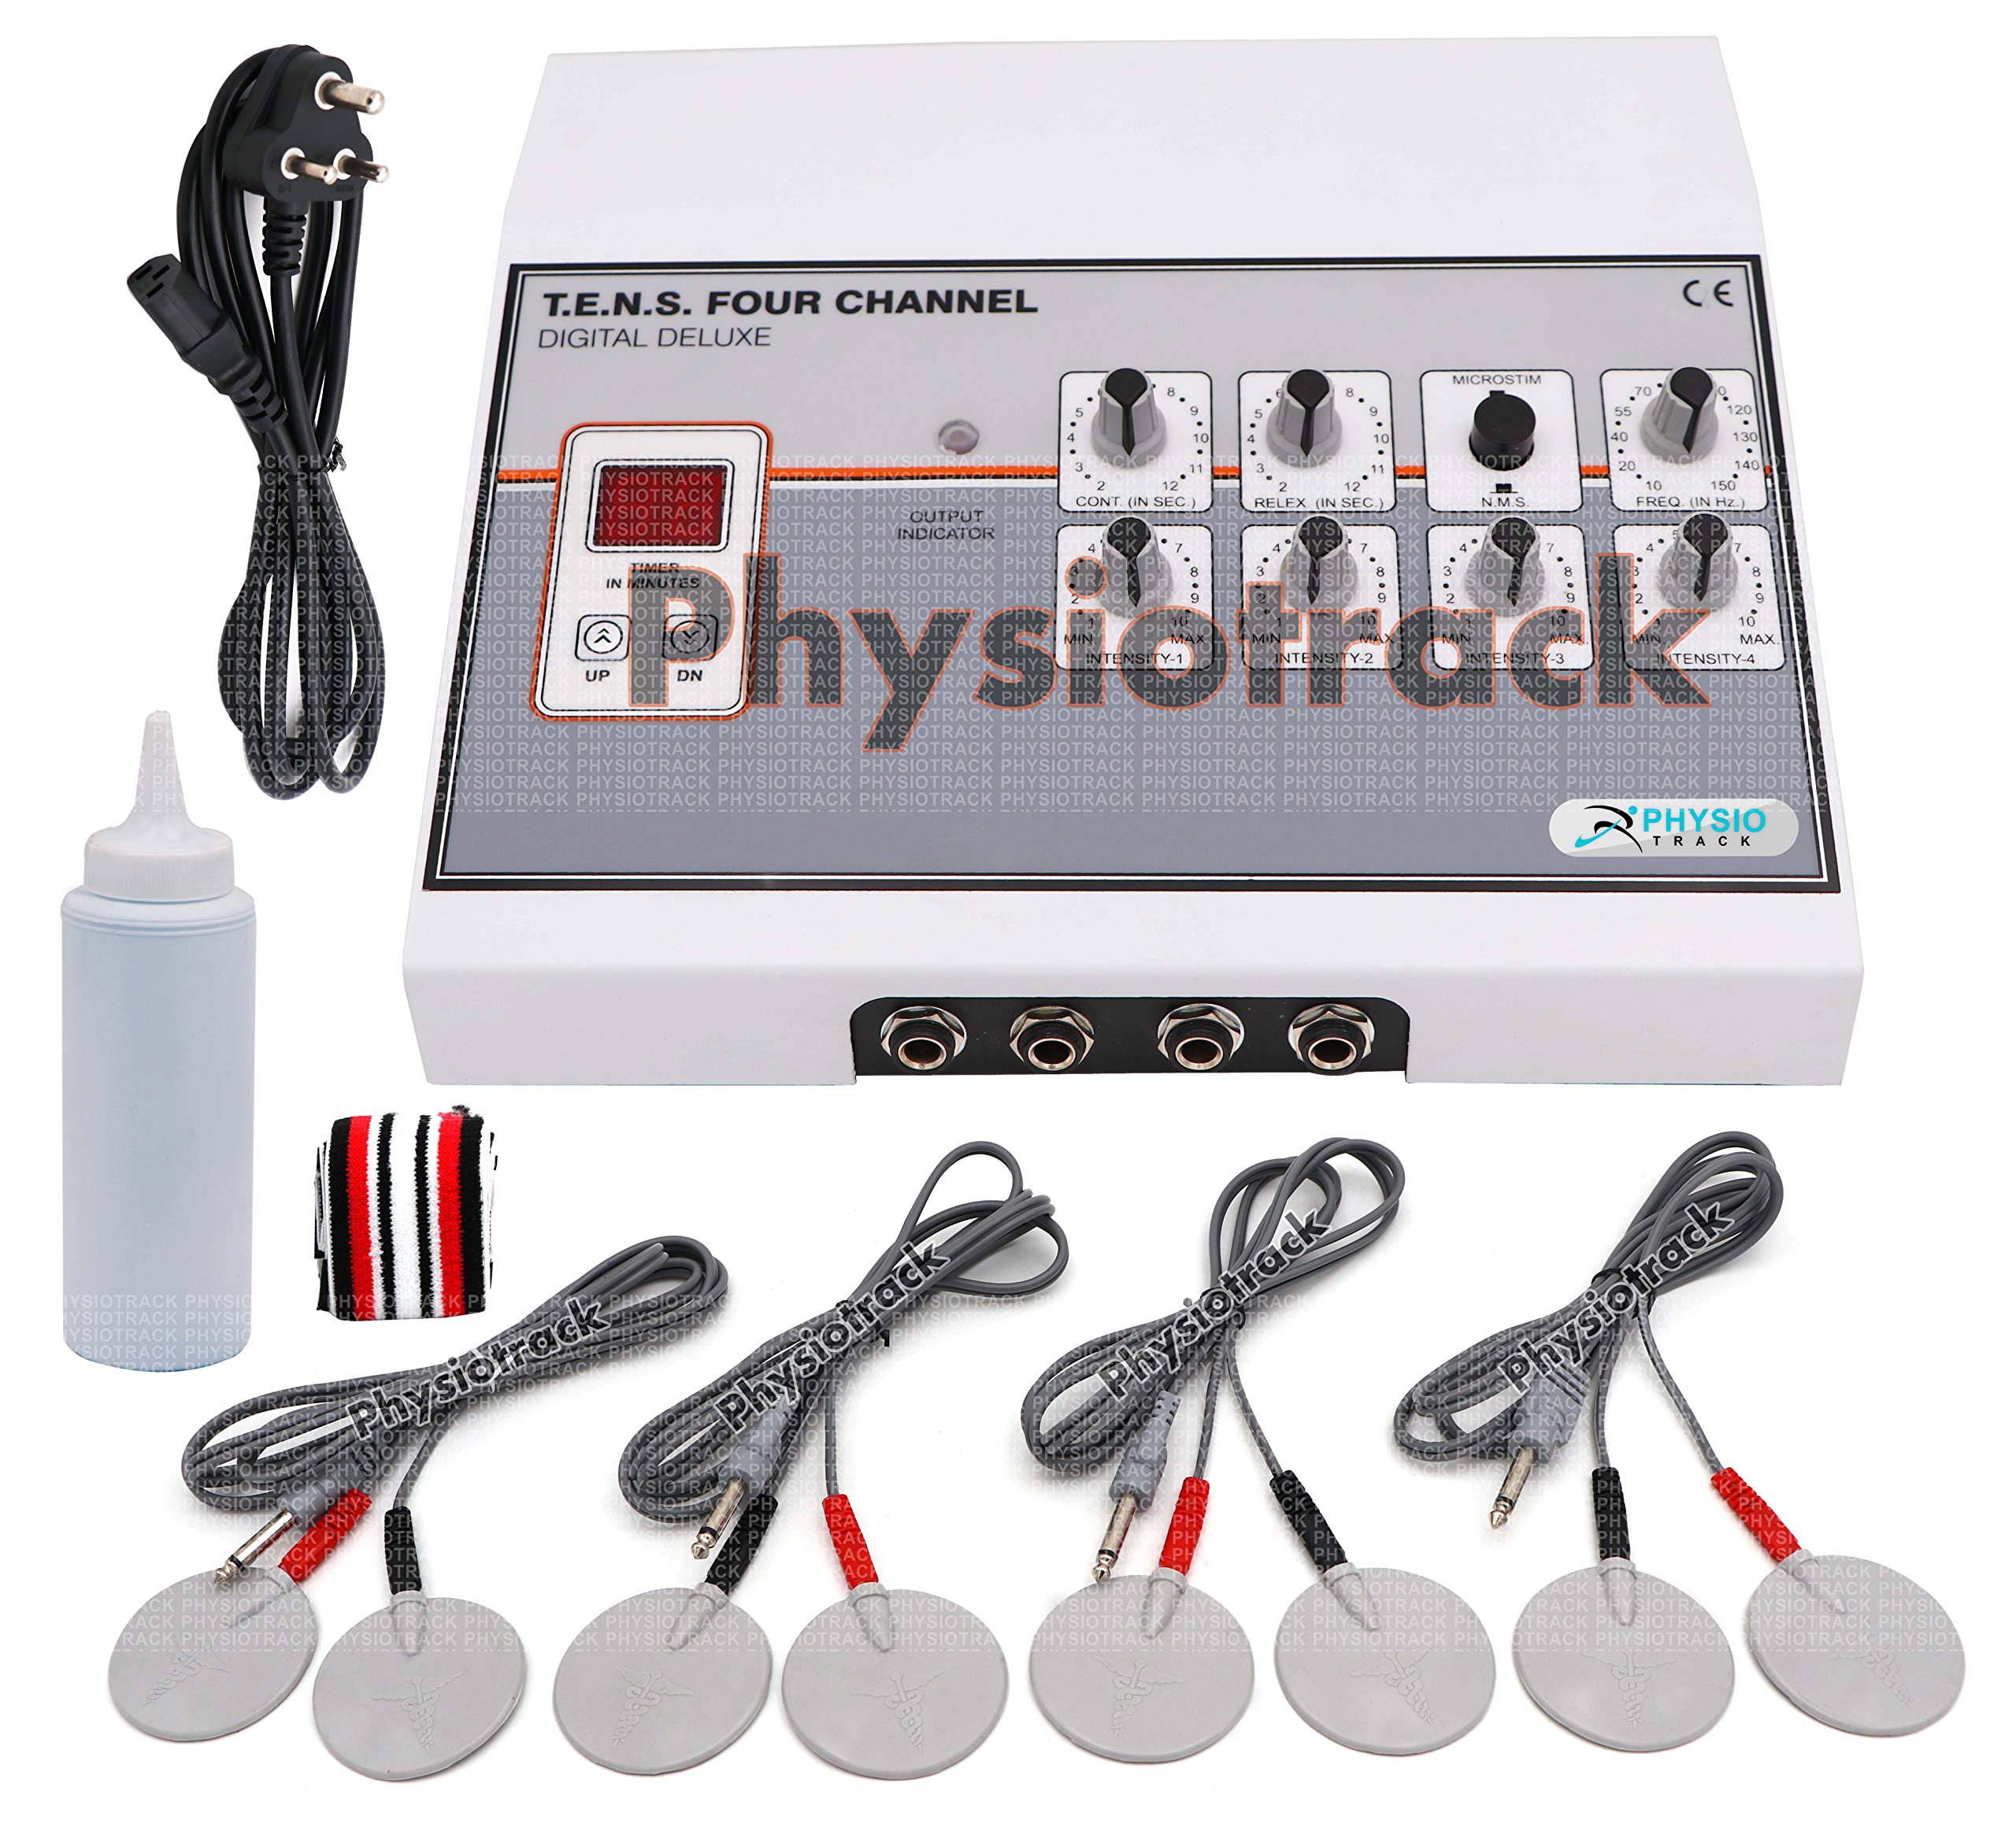 Physiotrack Tens 4 Channel Nms (Manual) Machine for Physiotherapy Equipments Physiotherapy Machine Nerve Stimulator